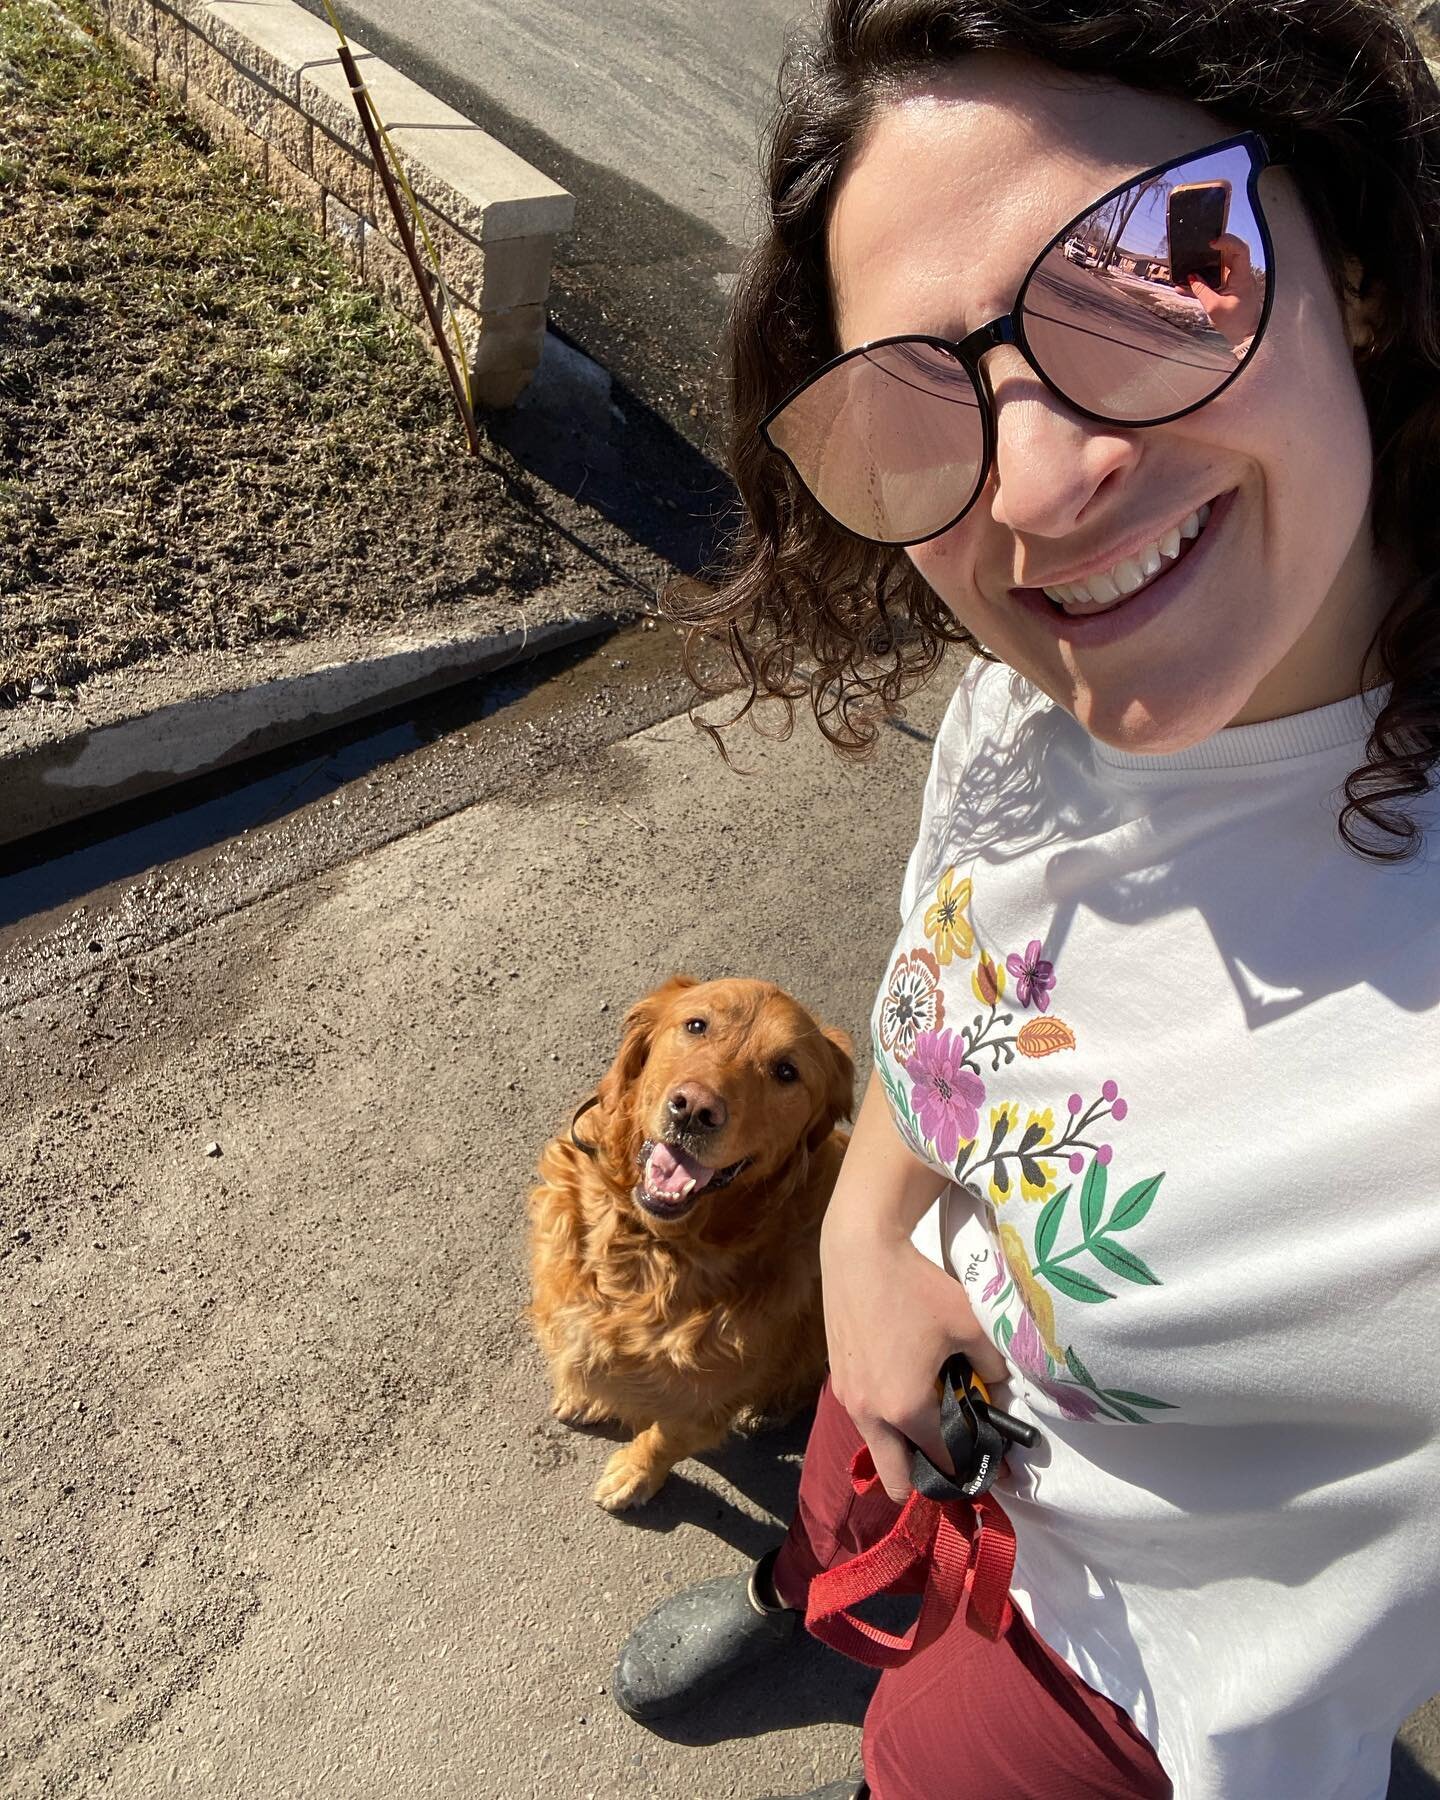 T-shirts, rubber boots, and sunshine sunshine so fine 🌞 

April 12th. 
Had to document it. 
WHAT A GIFT!!!!!!!!!!!

Feel that good energy, that excitement, that happiness?? 

That&rsquo;s the sun. Go catch it. 

#thunderbay #spring #knockonwood